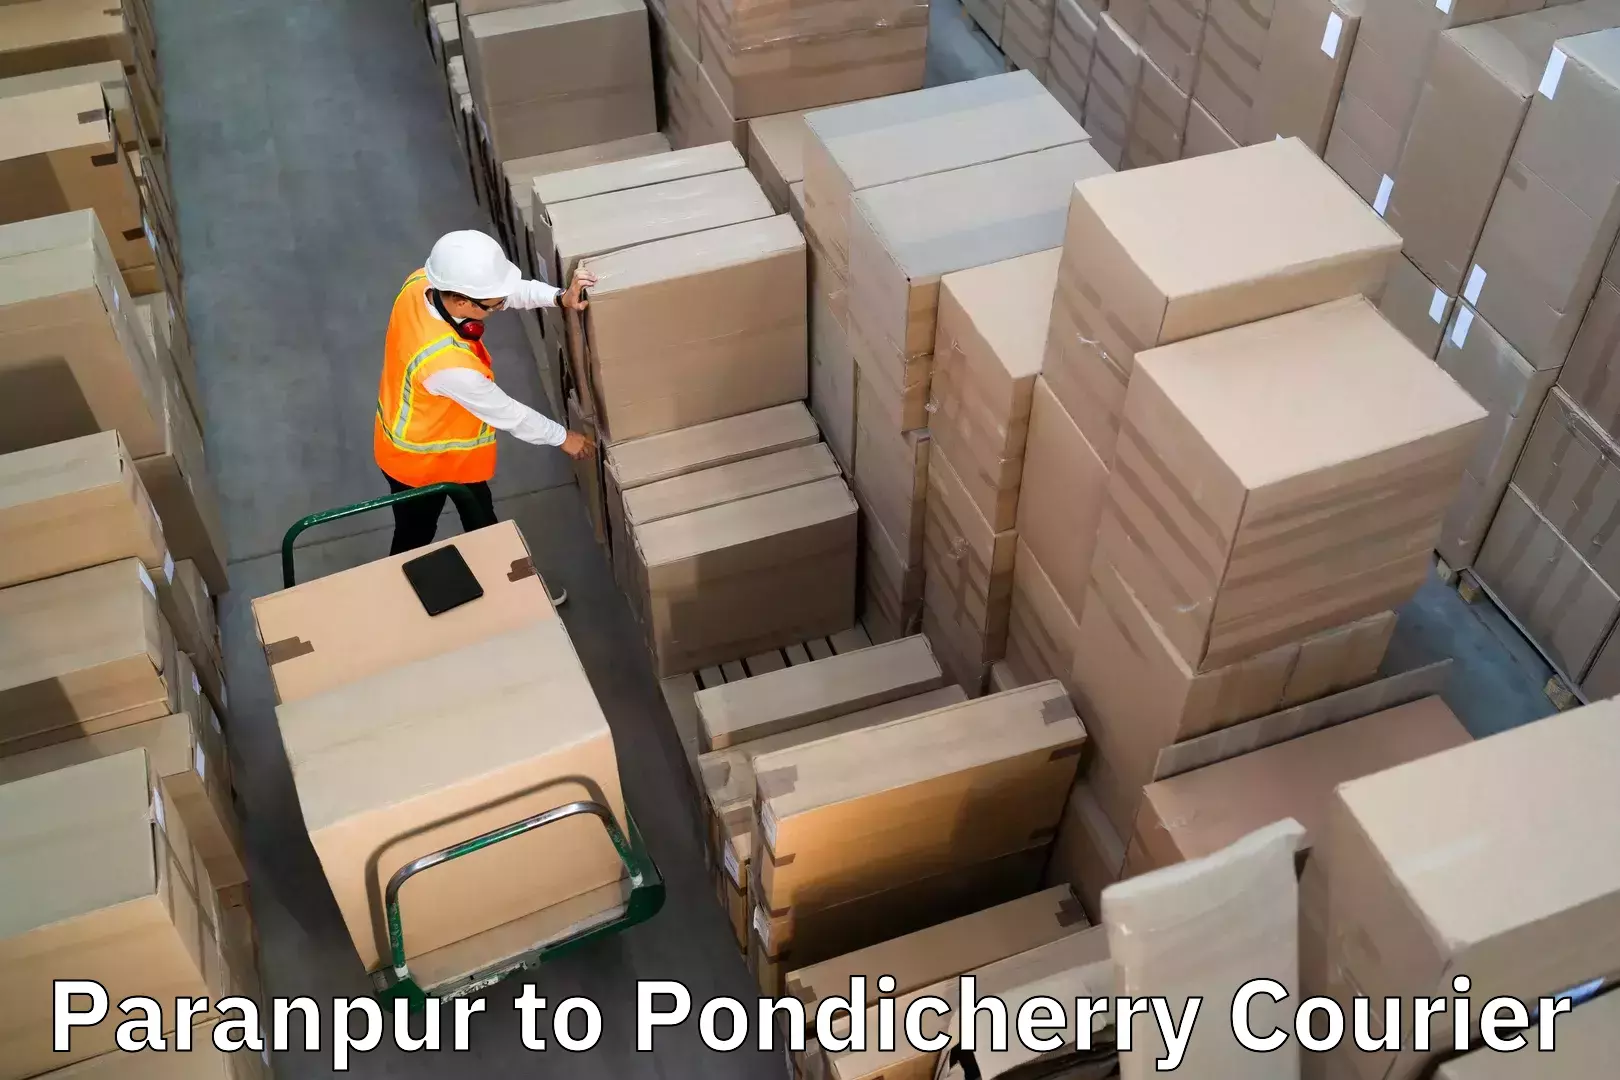 Luggage transport consultancy Paranpur to Pondicherry